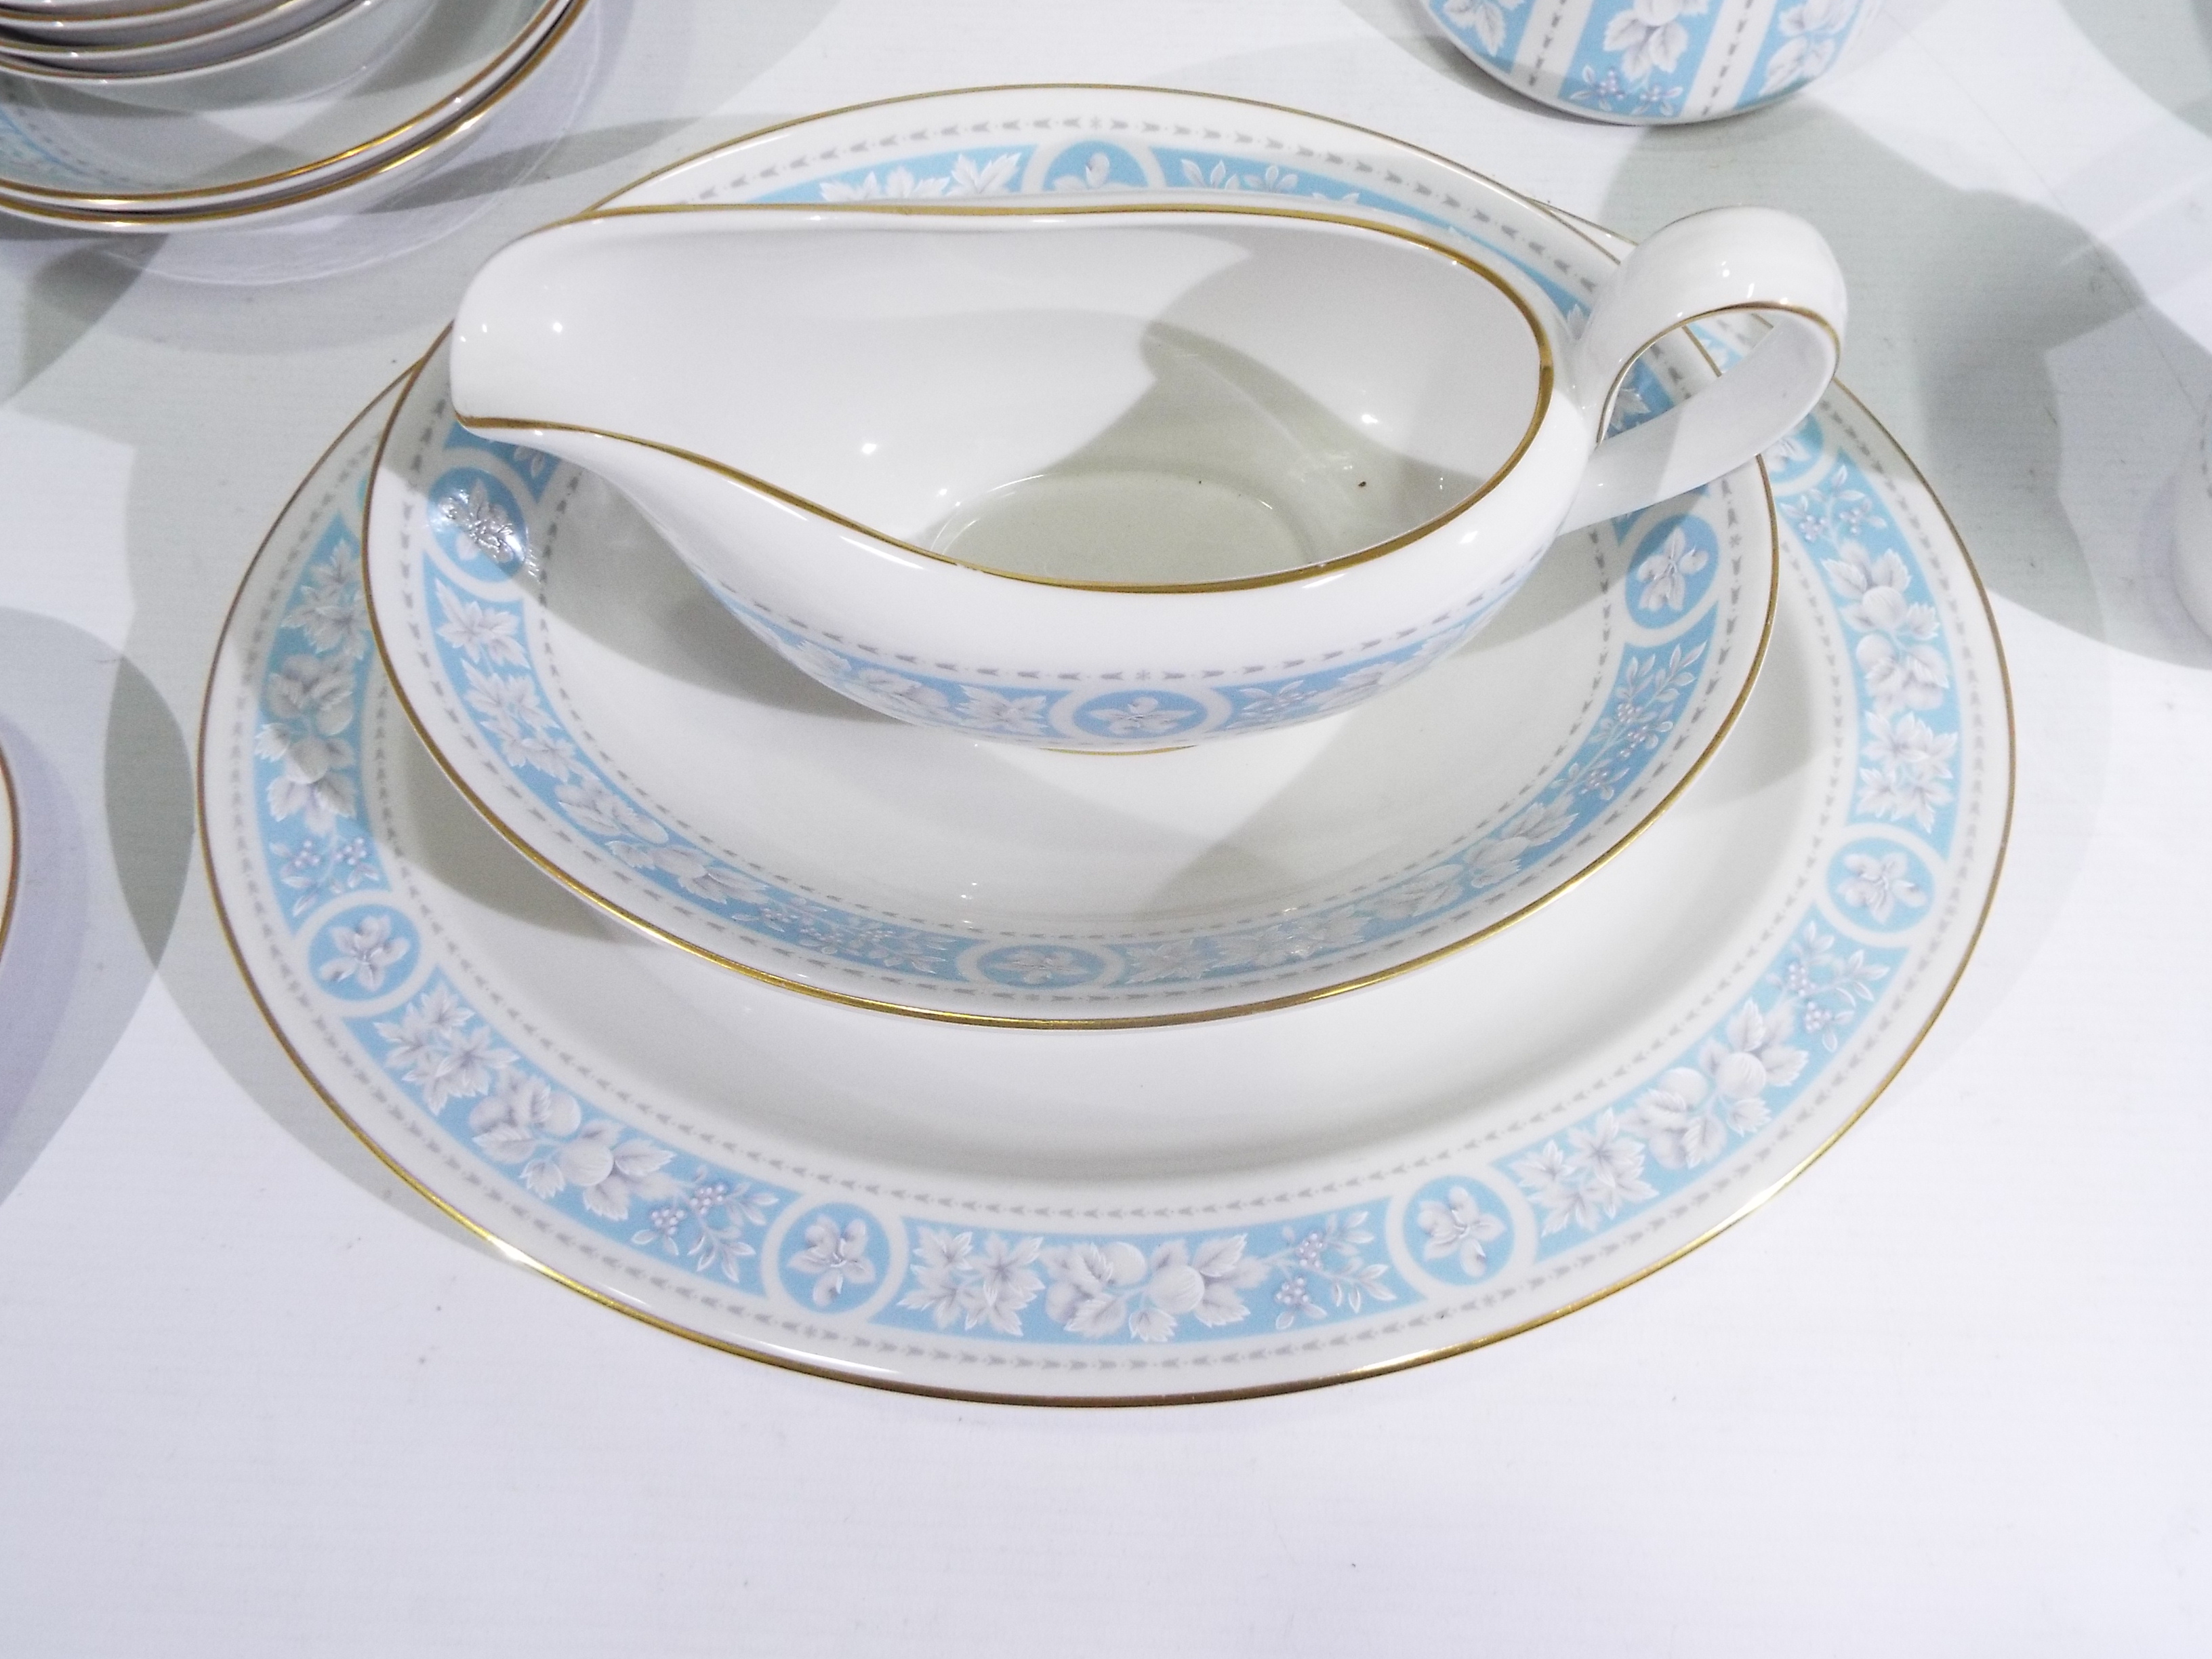 A quantity of Royal Doulton dinner and tea wares in the Hampton Court pattern, - Image 8 of 9